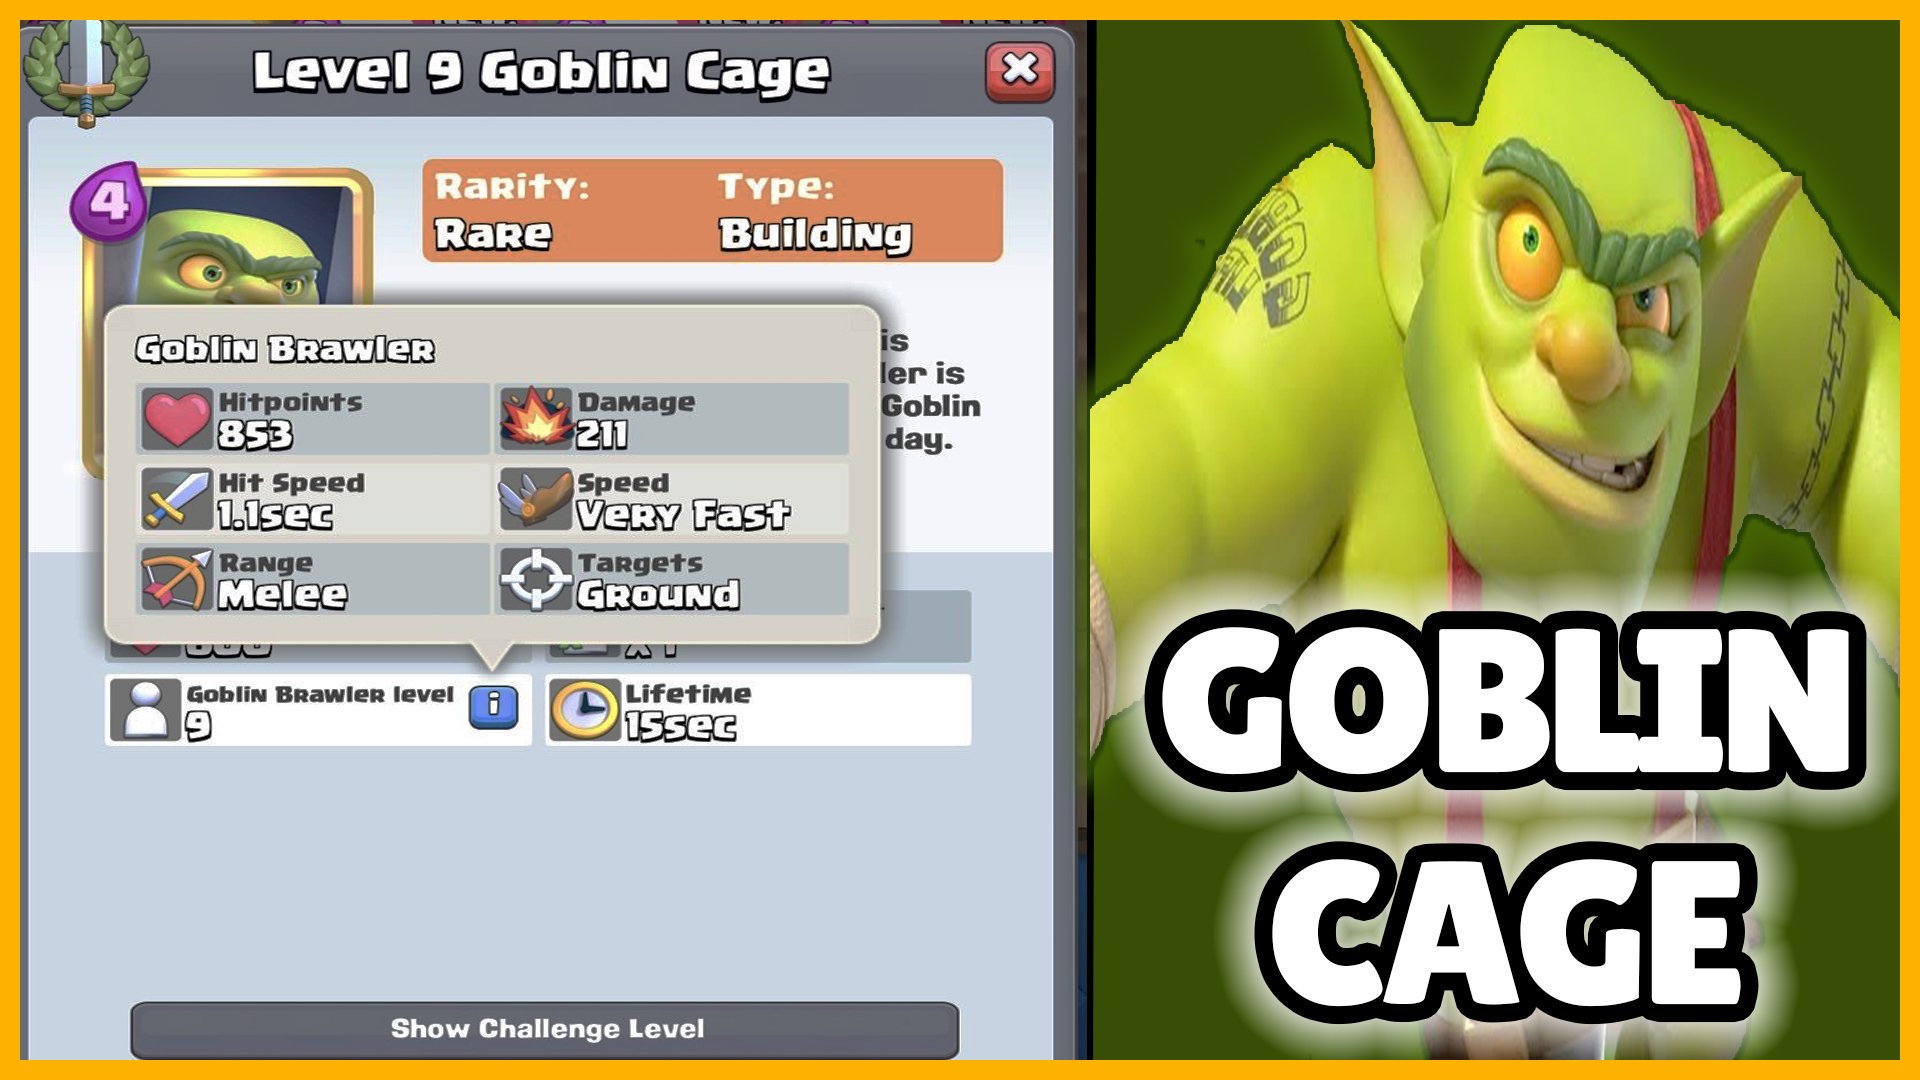 uddrag Governable sværge DRL | DaRealLegend on Twitter: "🚨Goblin Cage Card First Impressions🚨 NEW  Video: https://t.co/18x3XYiAr2 via @YouTube @ClashRoyale #ClashRoyale  #GoblinCage https://t.co/d0gPc7BNT1" / Twitter